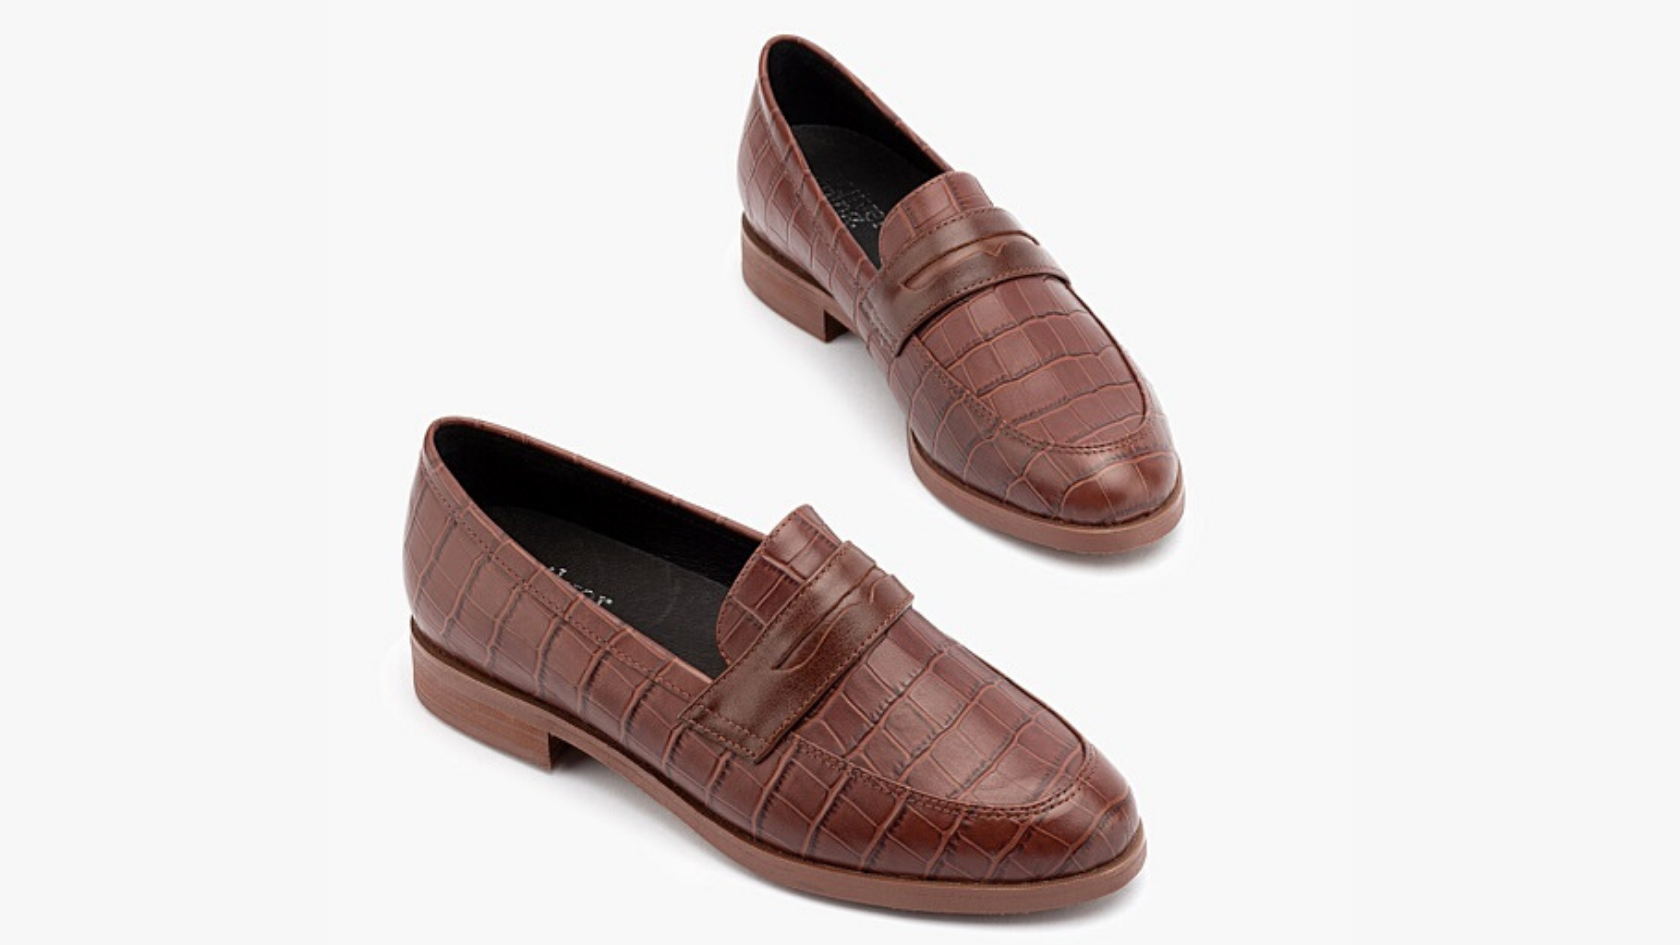 A pair of women’s faux crocodile-skin loafers in tan leather against a neutral background.  